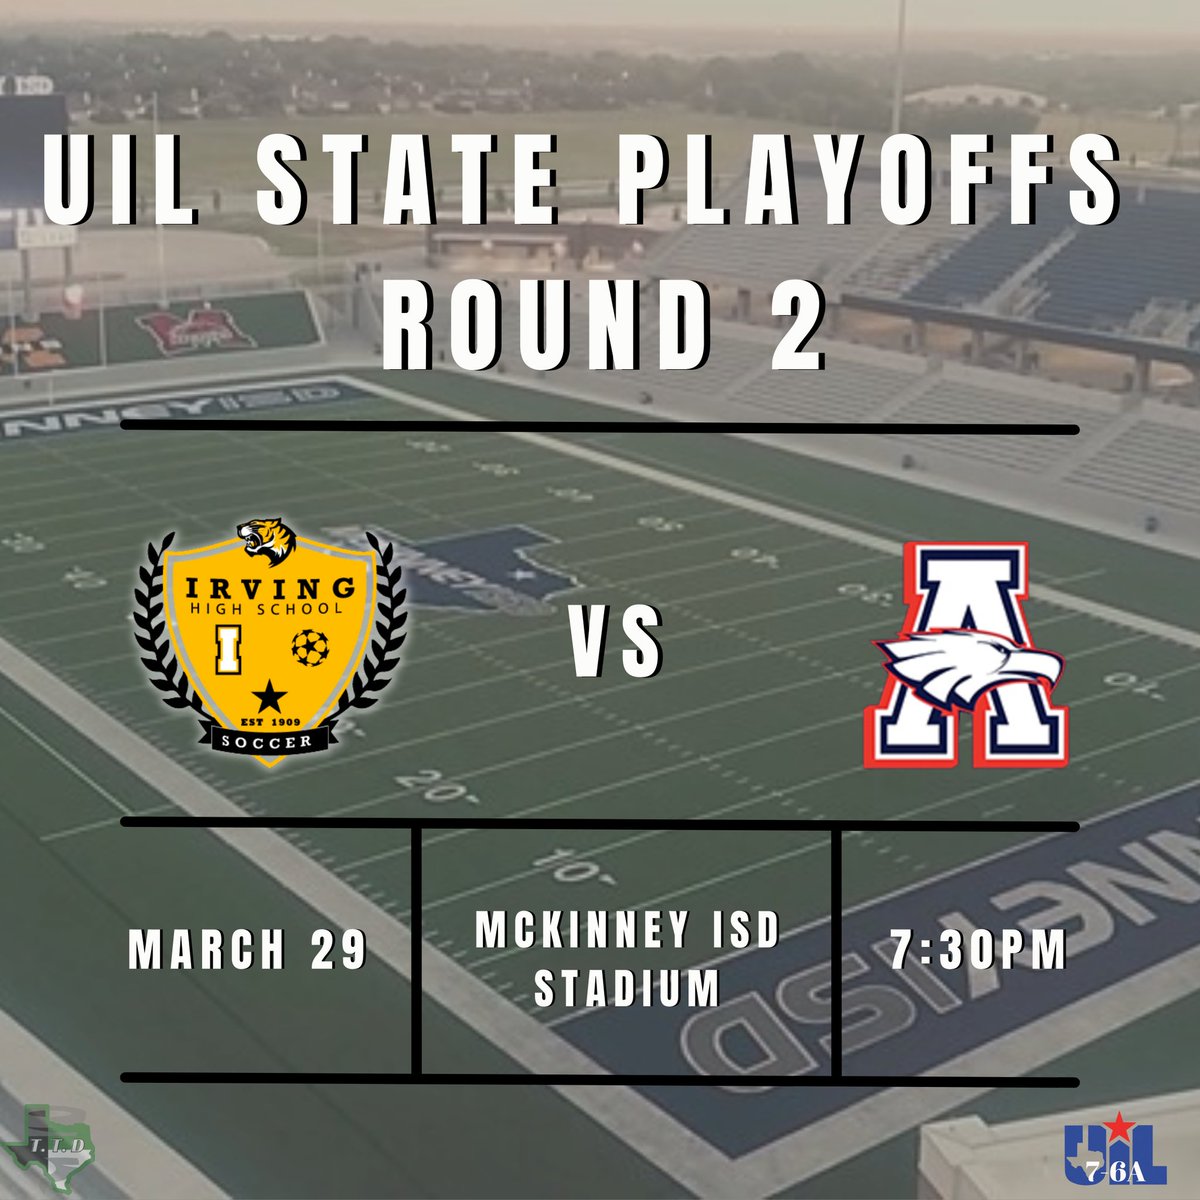 ‼️ Round 2 (Area) stage has been set vs Allen HS ‼️

🎟: Tickets are not available yet, but the link is in our BIO

#TigerSoccer #ProveThemWrong #UILSoccer #Round2 #Area #BringtheNoise
#TexasTornadoDesigns